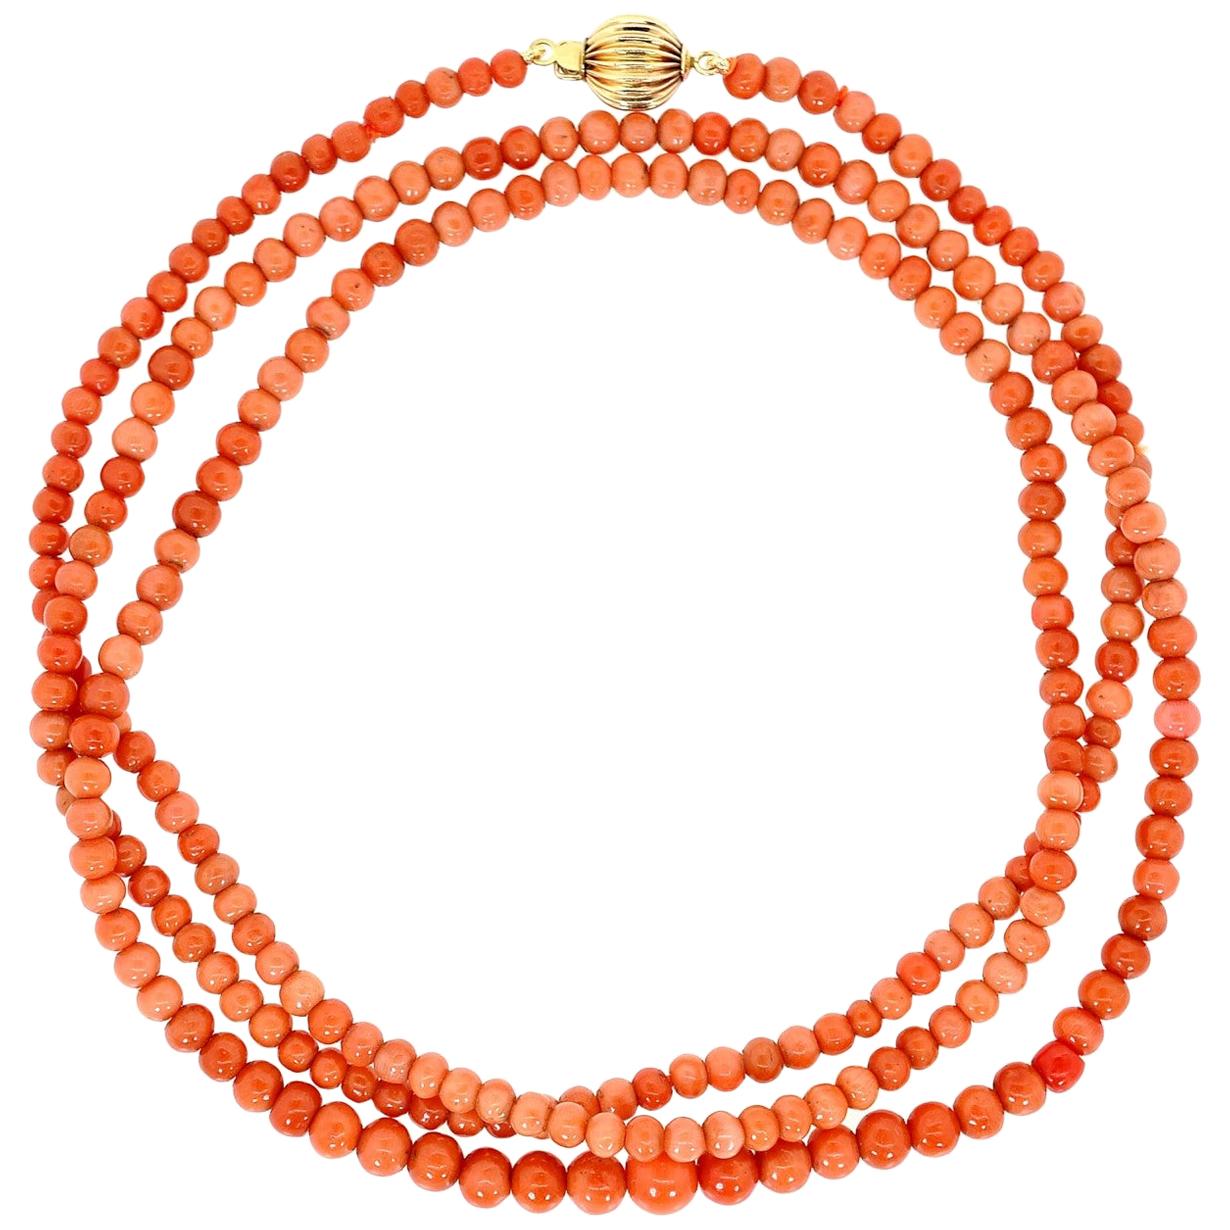 Antique Coral Beads Necklace